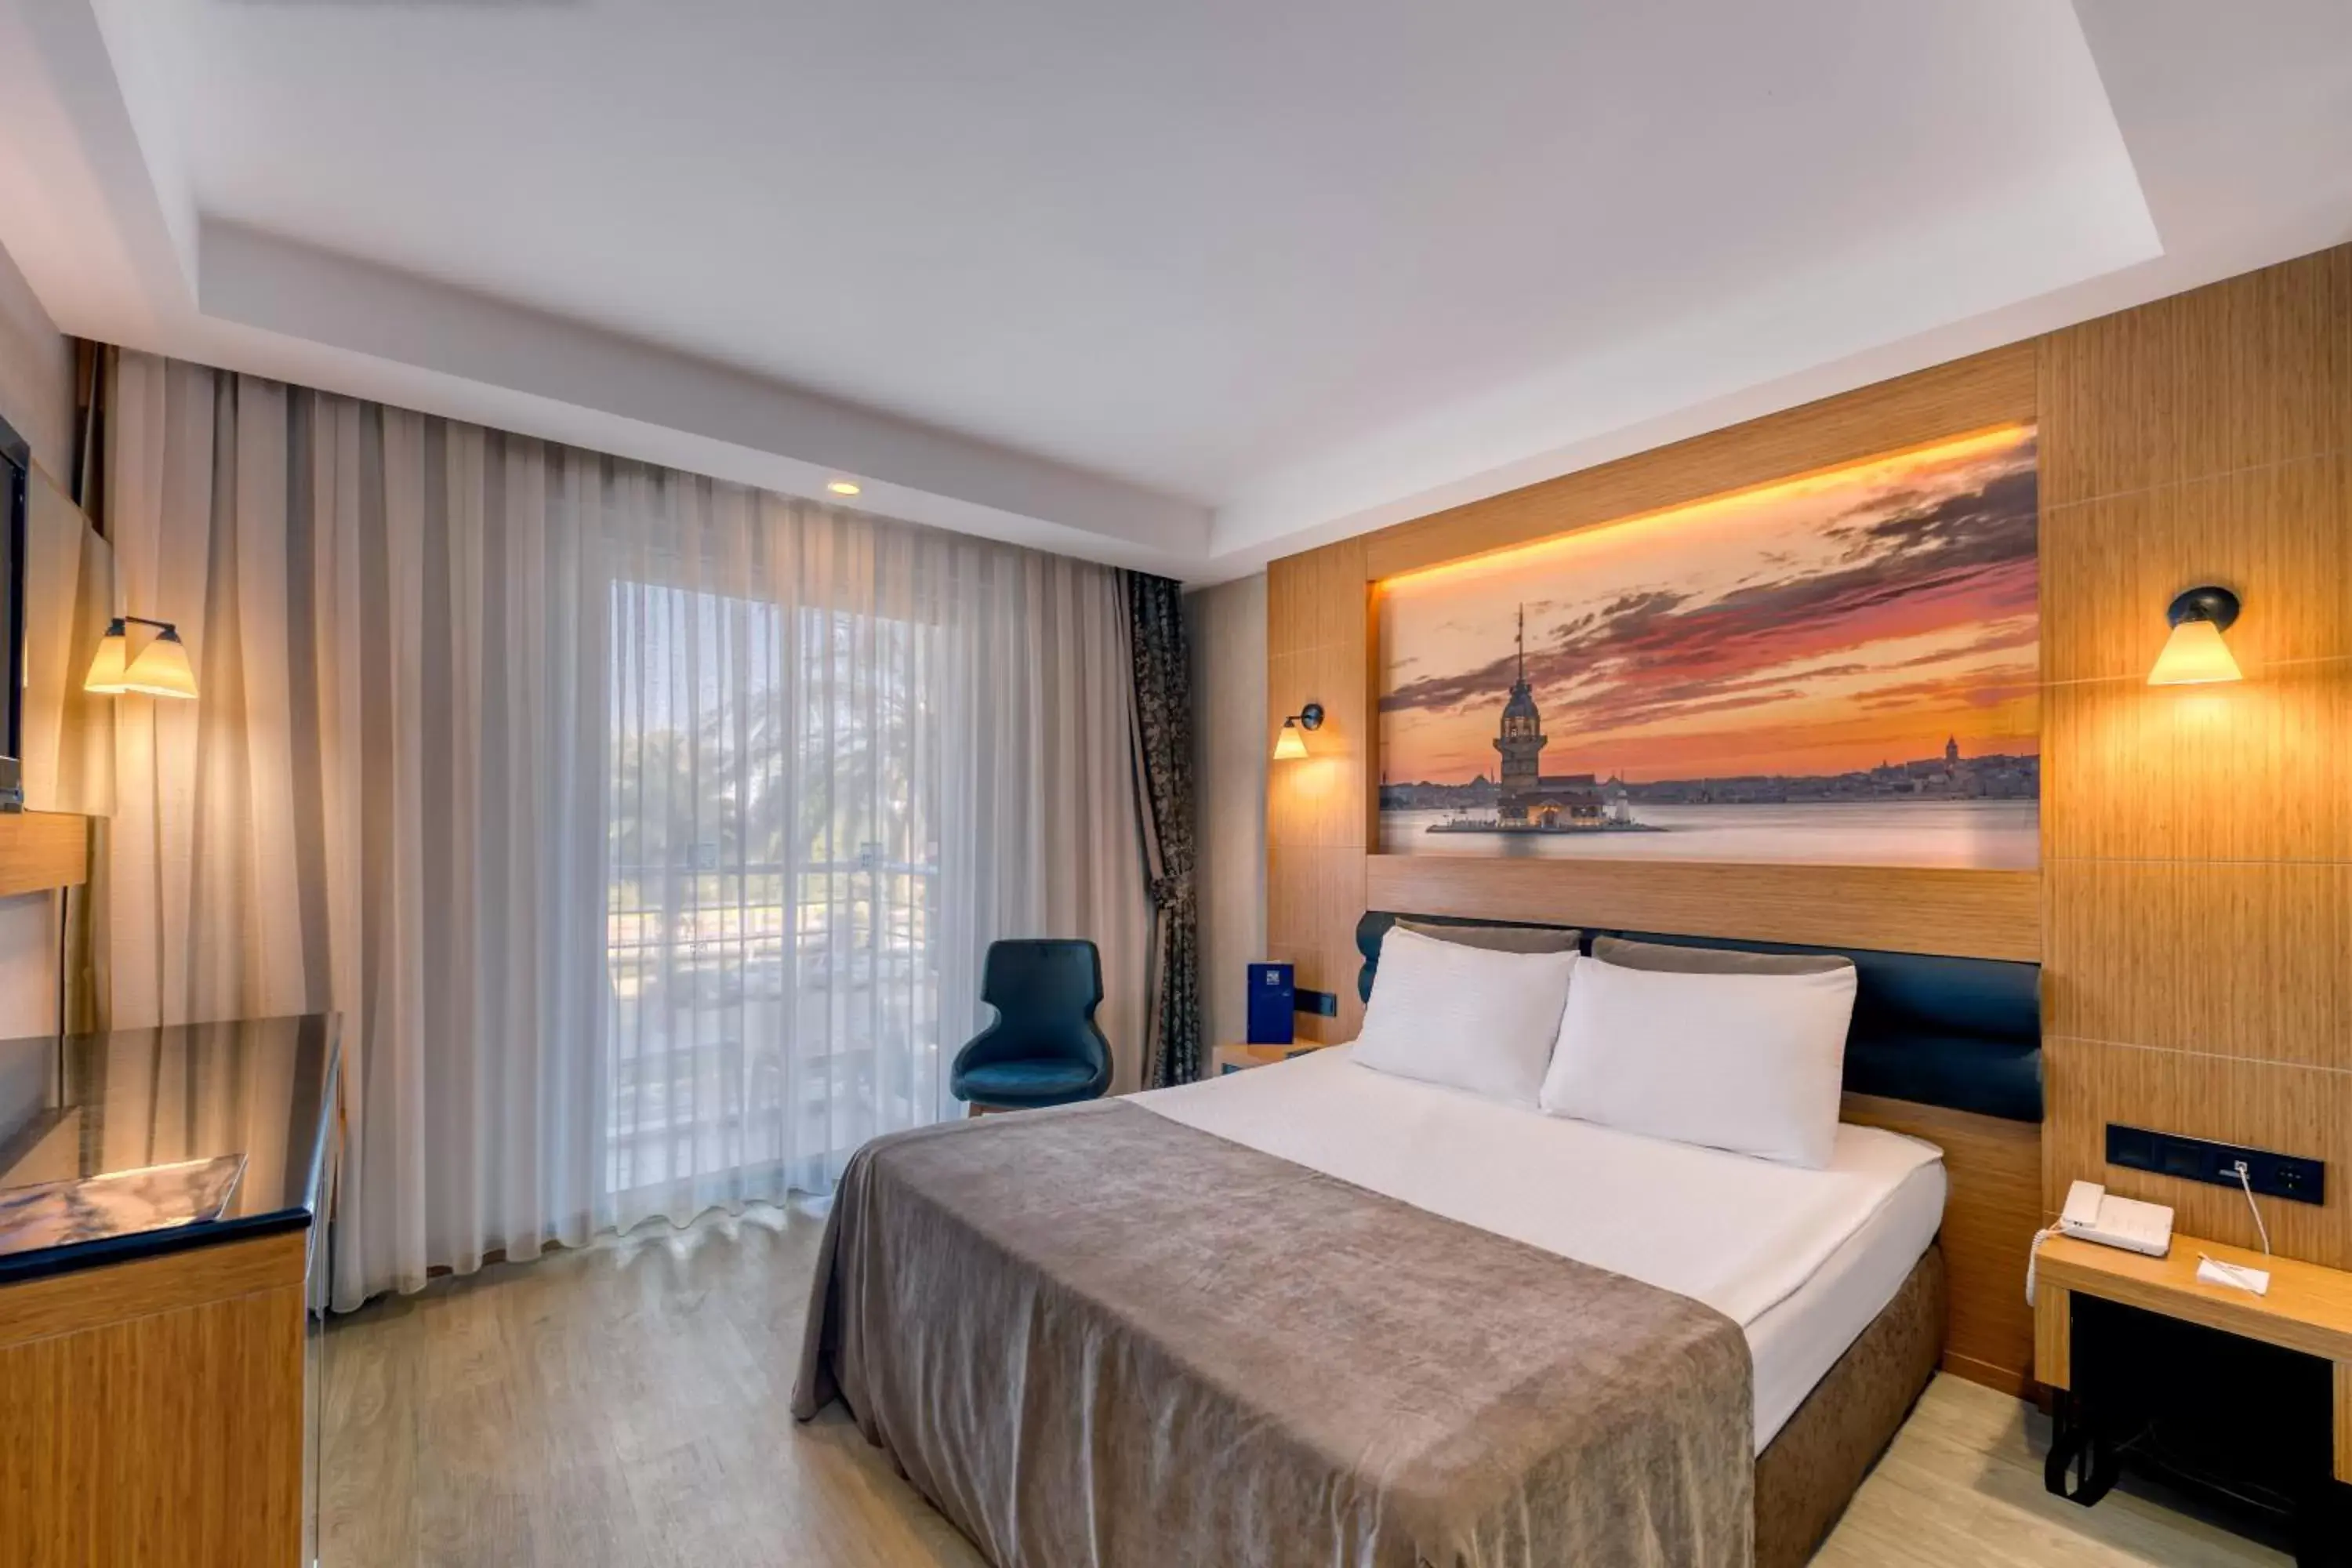 Economy Double Room with Land View in Sealife Family Resort Hotel